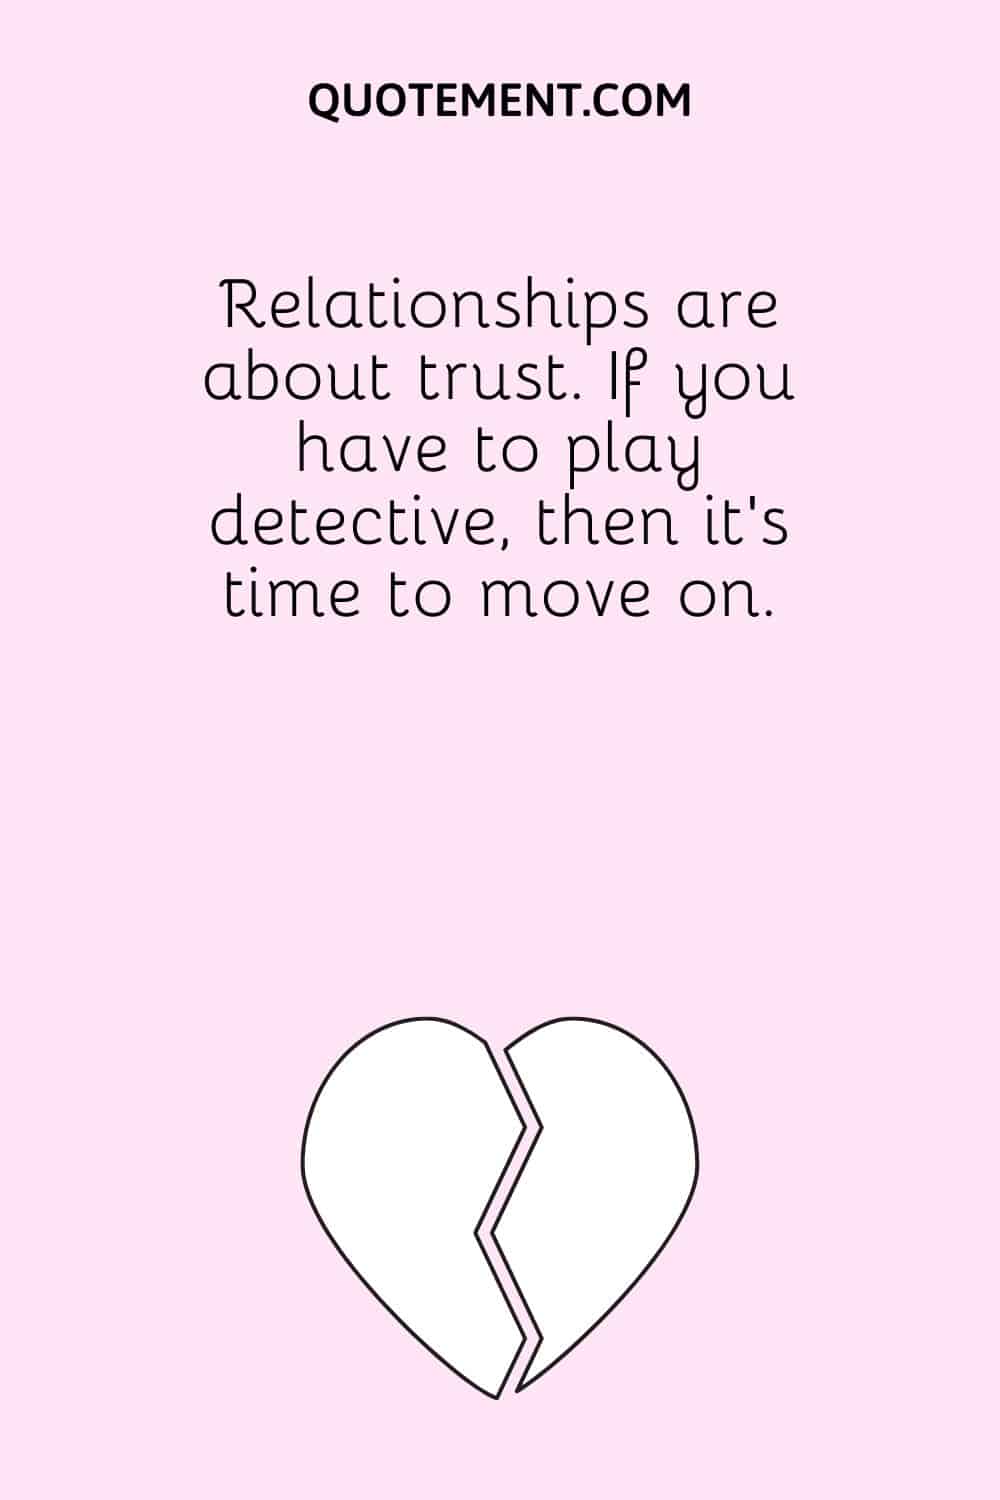 Relationships are about trust. If you have to play detective, then it’s time to move on.